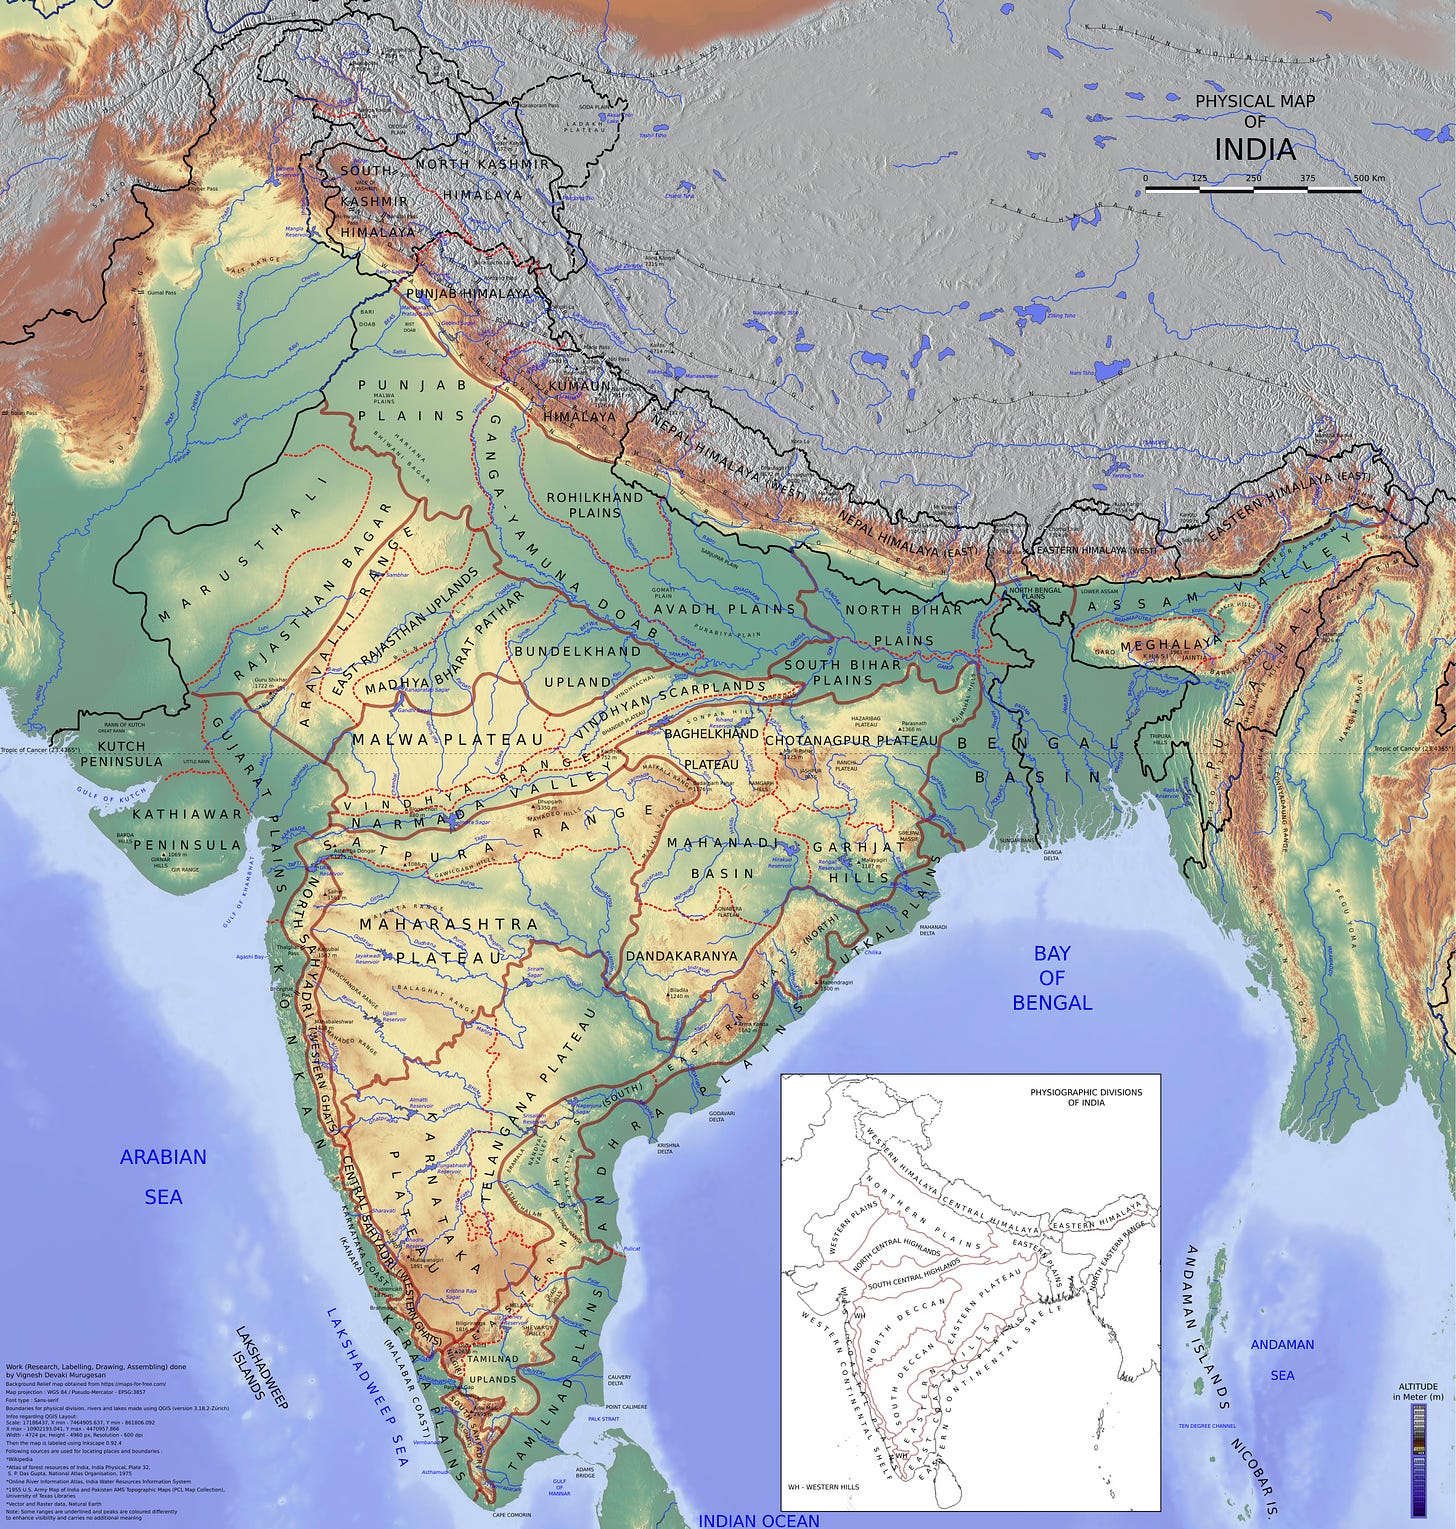 File:Physical Map of India.jpg - Wikimedia Commons